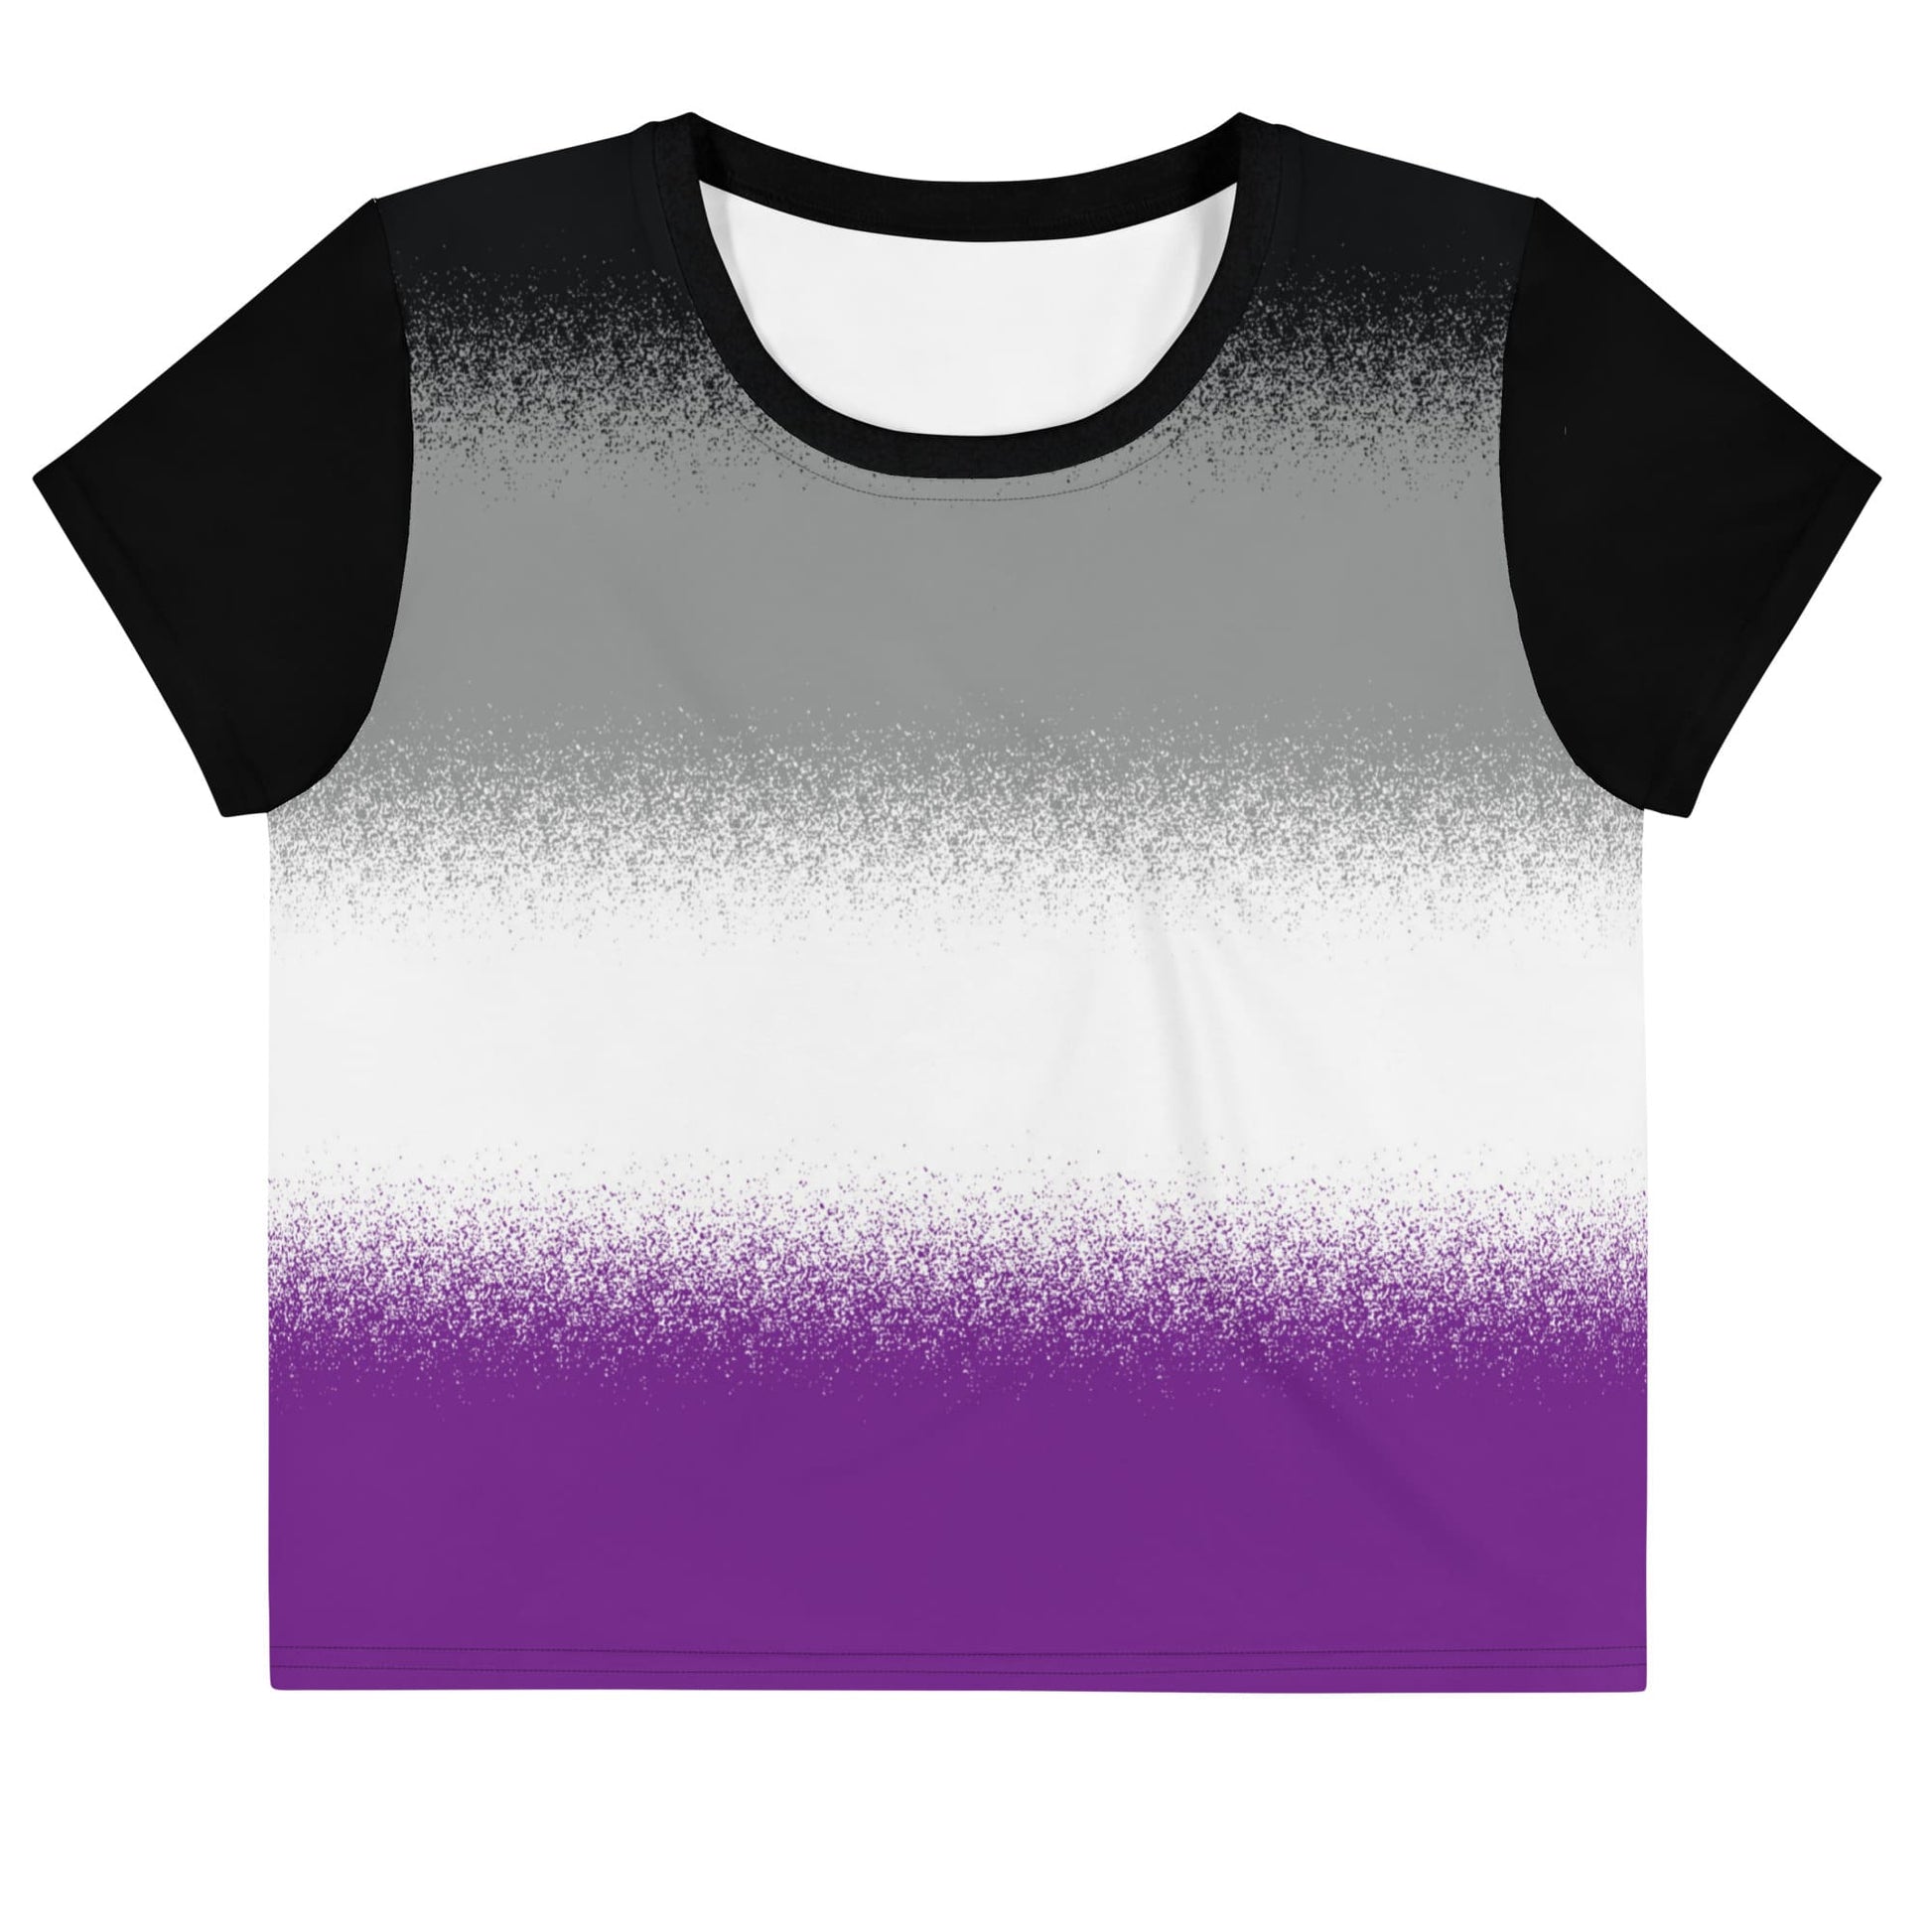 asexual crop top, ace pride cropped shirt with wings at the back, flatlay front